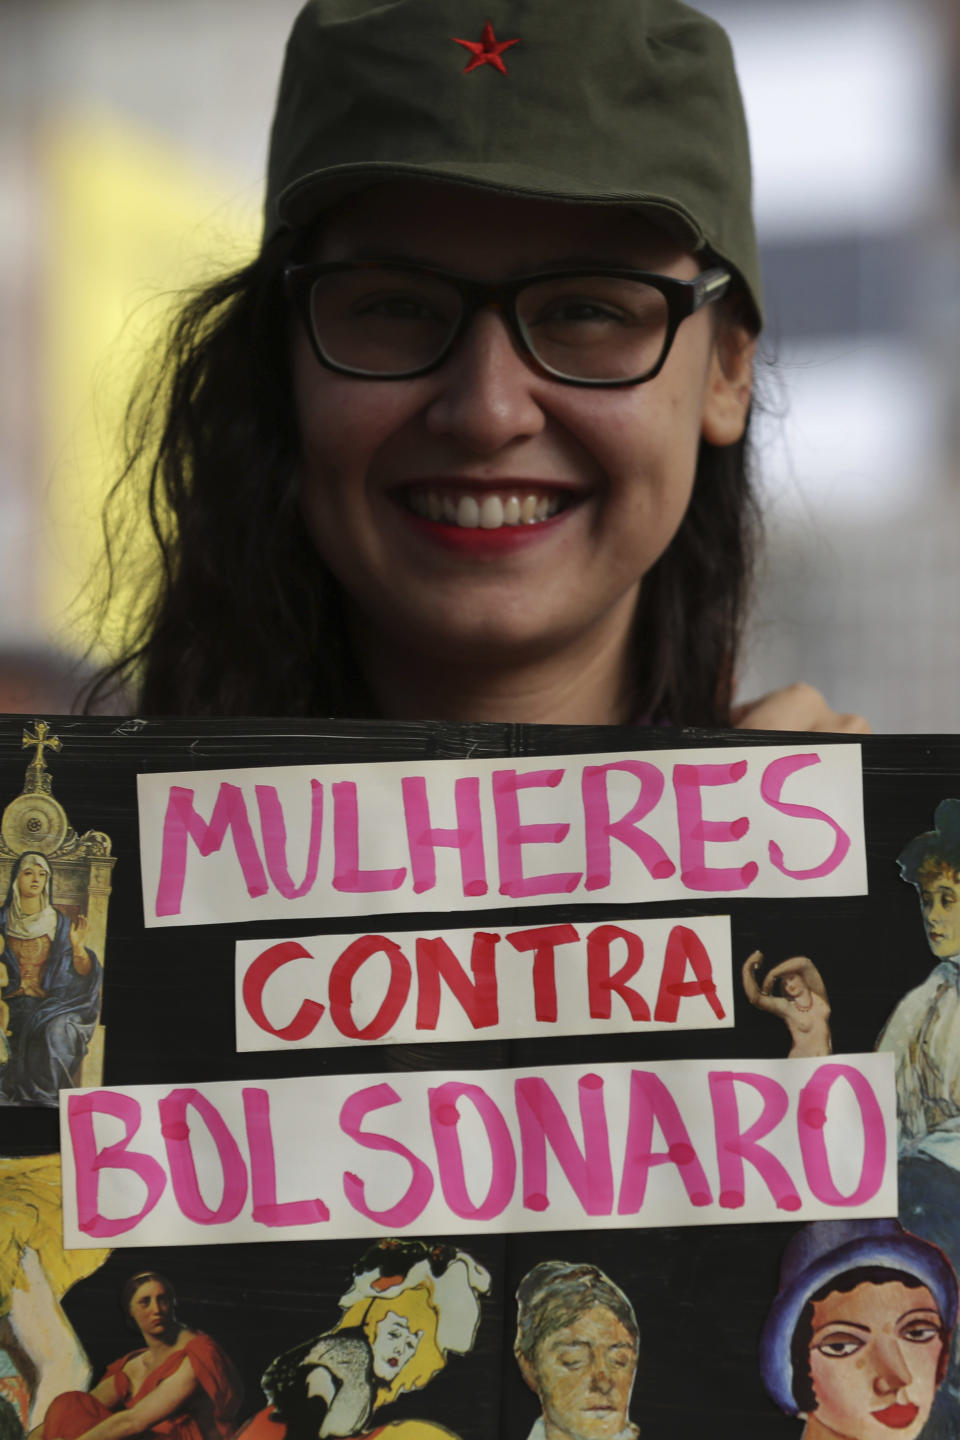 A woman shows a sign that reads in Portuguese "Women Against Bolsonaro" during a protest in Brasilia, Brazil, on Saturday, Oct. 20, 2018. Women and left-wing militants held protests across the country against the right-wing presidential candidate Jair Bolsonaro. (AP Photo/Eraldo Peres)